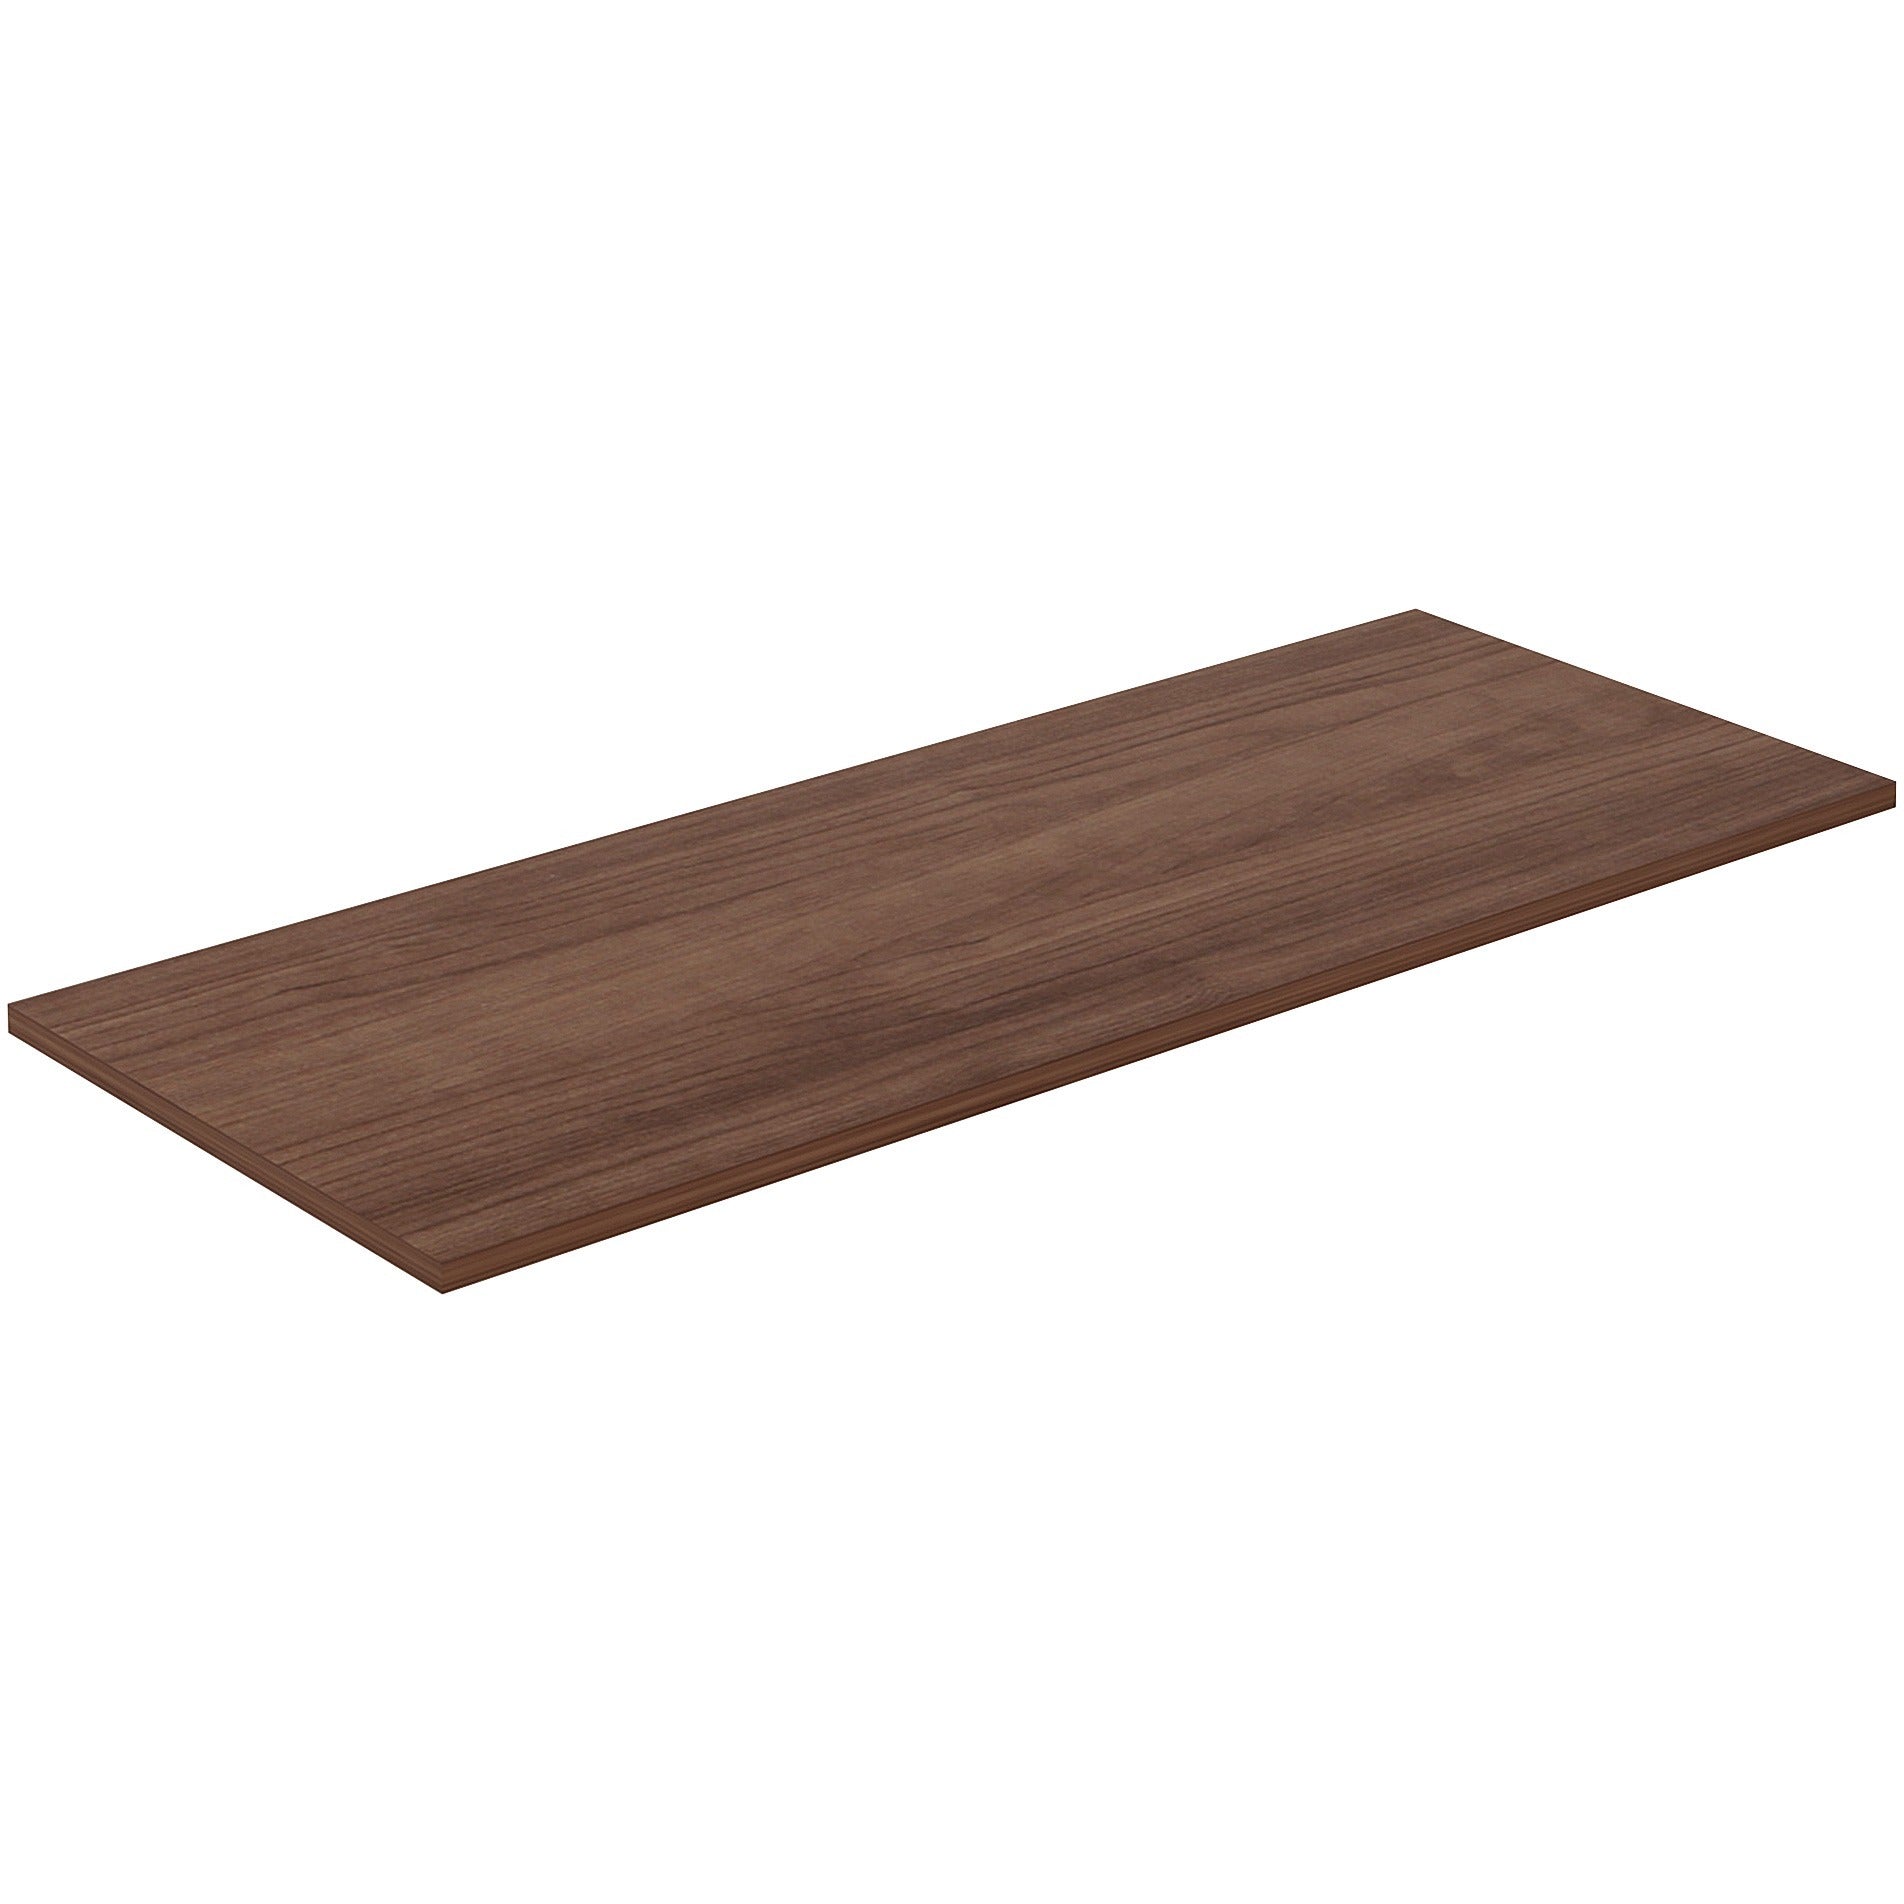 lorell-relevance-series-tabletop-for-table-topwalnut-rectangle-laminated-top-adjustable-height-x-24-table-top-width-x-60-table-top-depth-x-1-table-top-thickness-assembly-required-1-each_llr59635 - 3